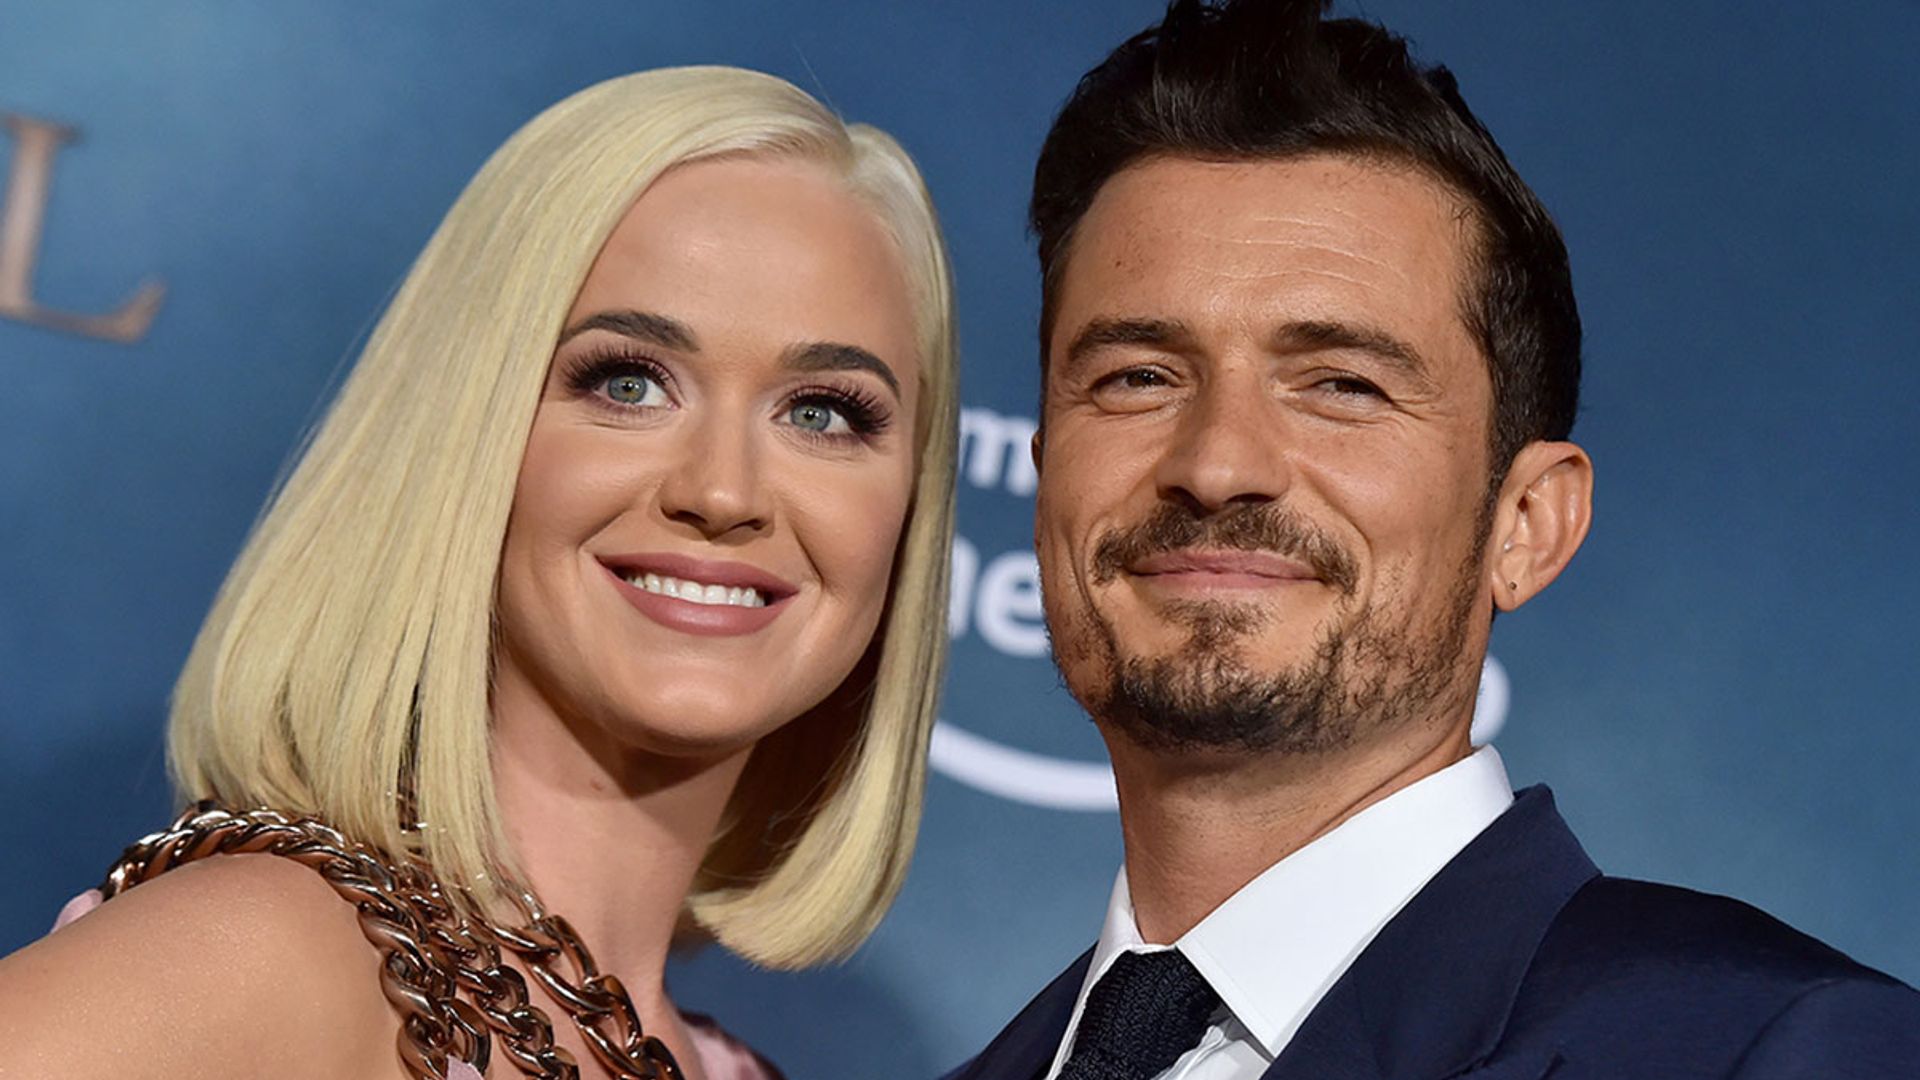 Katy Perry and Orlando Bloom spark reaction with rare couple selfie